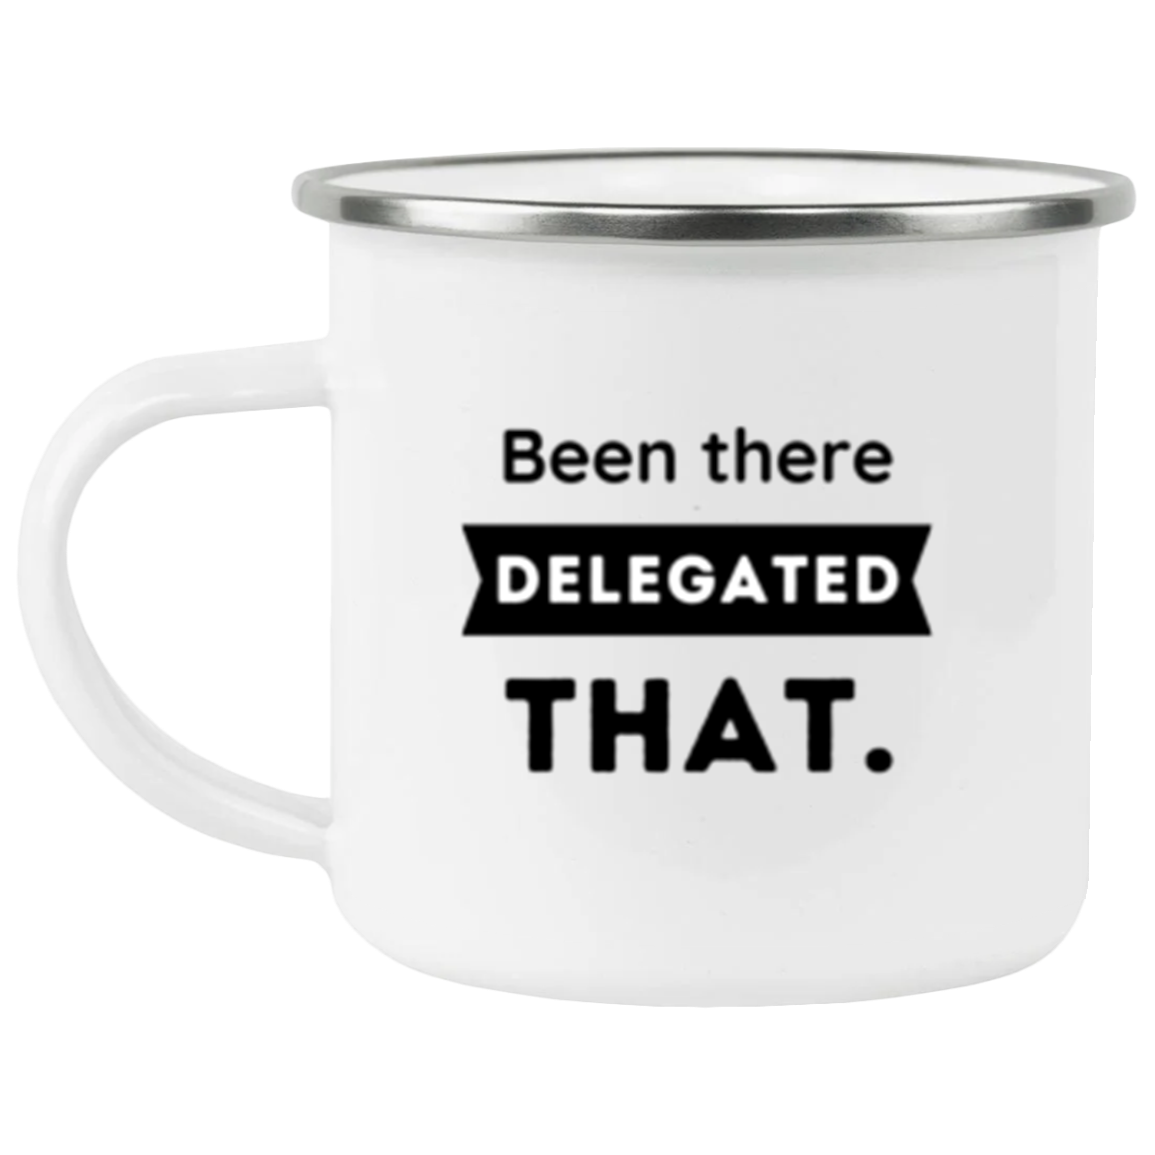 Been there, delegated that - Enamel Mug